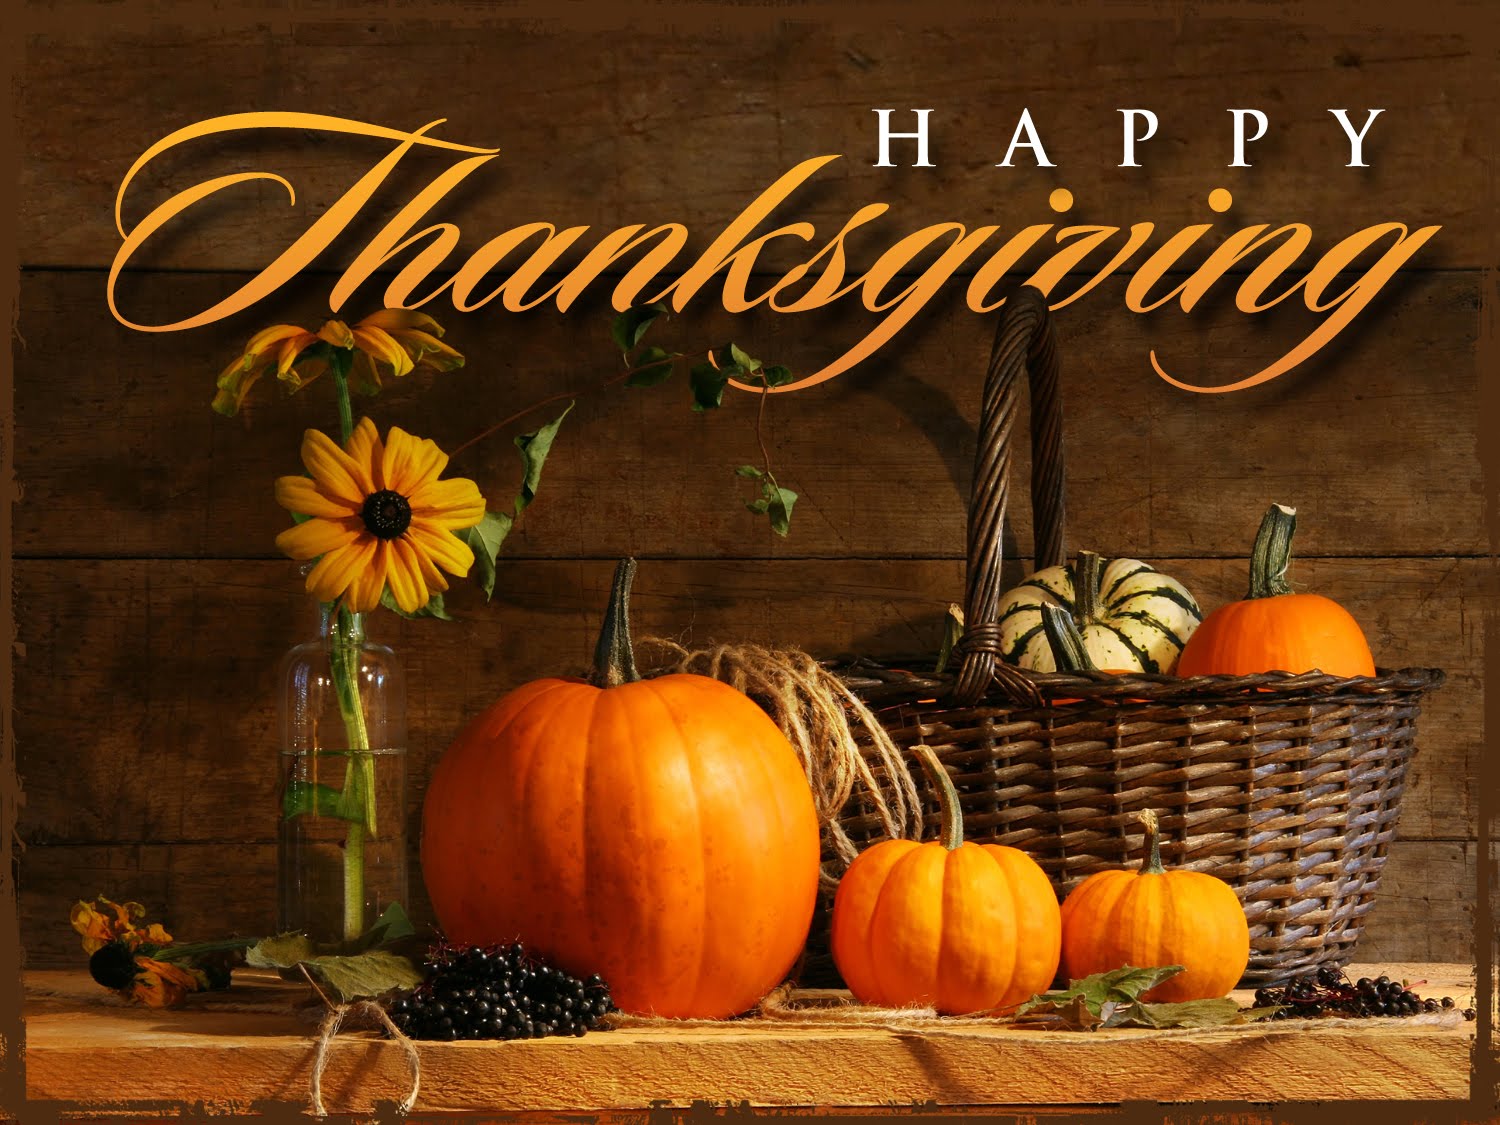 Happy Thanksgiving Wallpaper Pictures Pics Photos Image